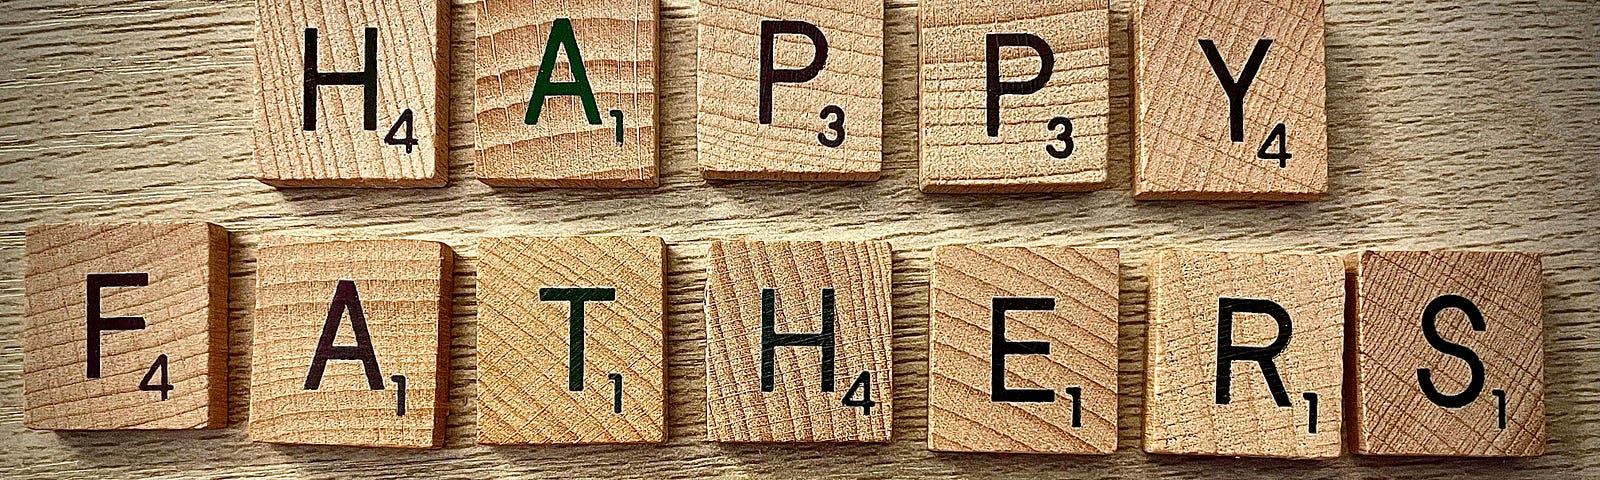 alphabets spell “Happy Fathers Day” on blocks of wood.